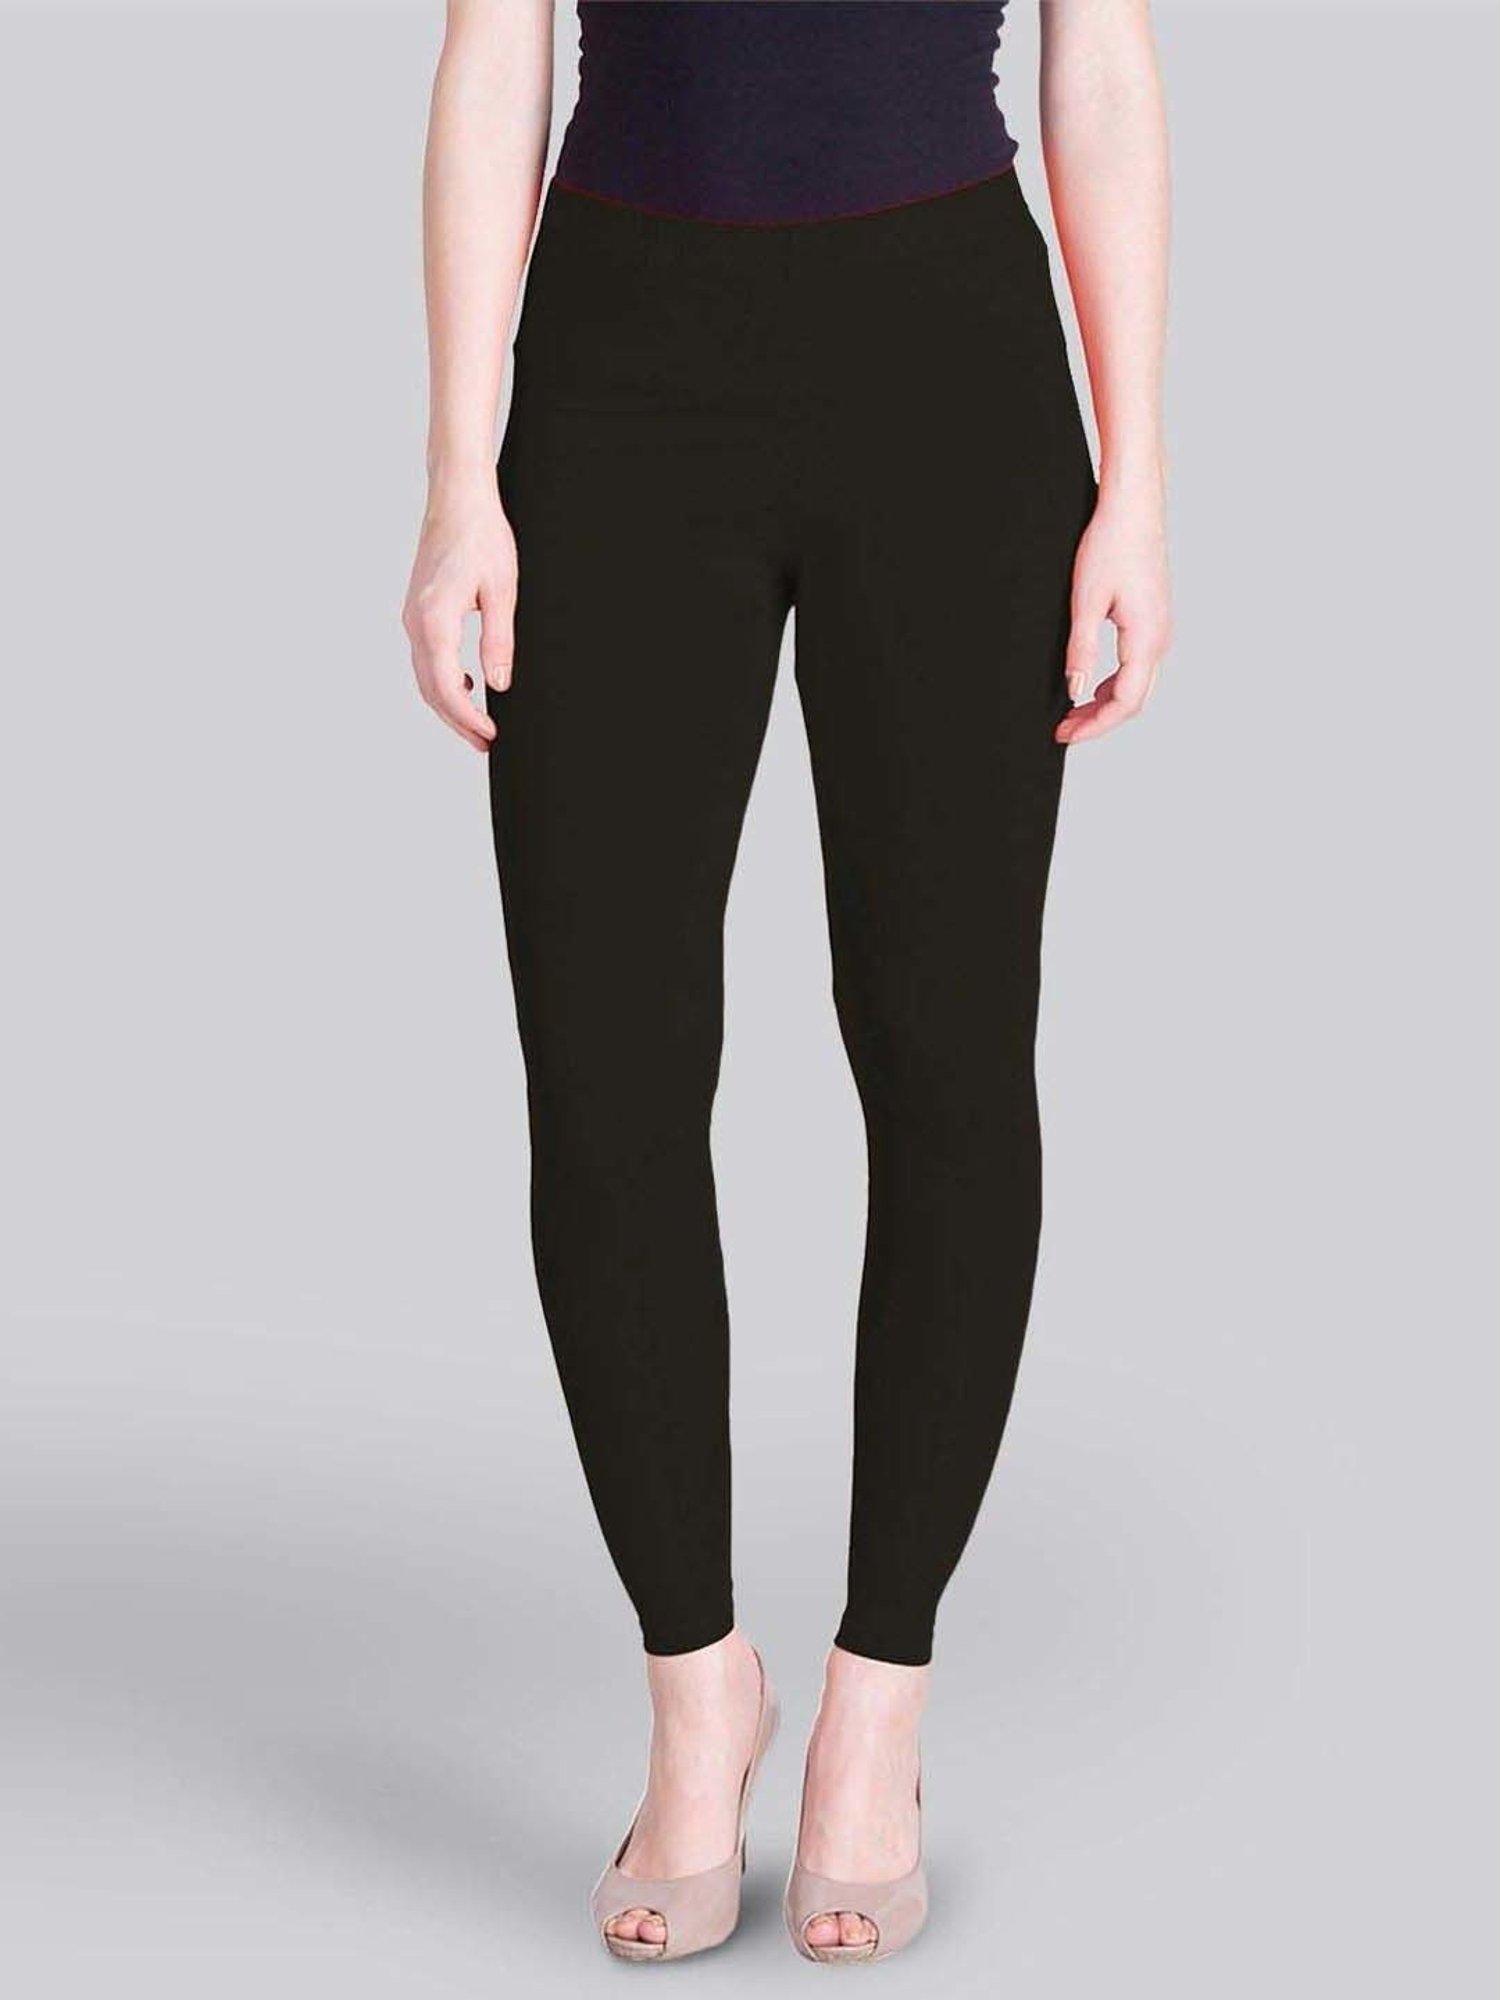 Luluwomen High Waist Seamless Yoga Leggings Lyra For Women Anti Curling, No  Embarrassment, Perfect For Fitness And Jogging From Luluyogasupplies,  $19.46 | DHgate.Com